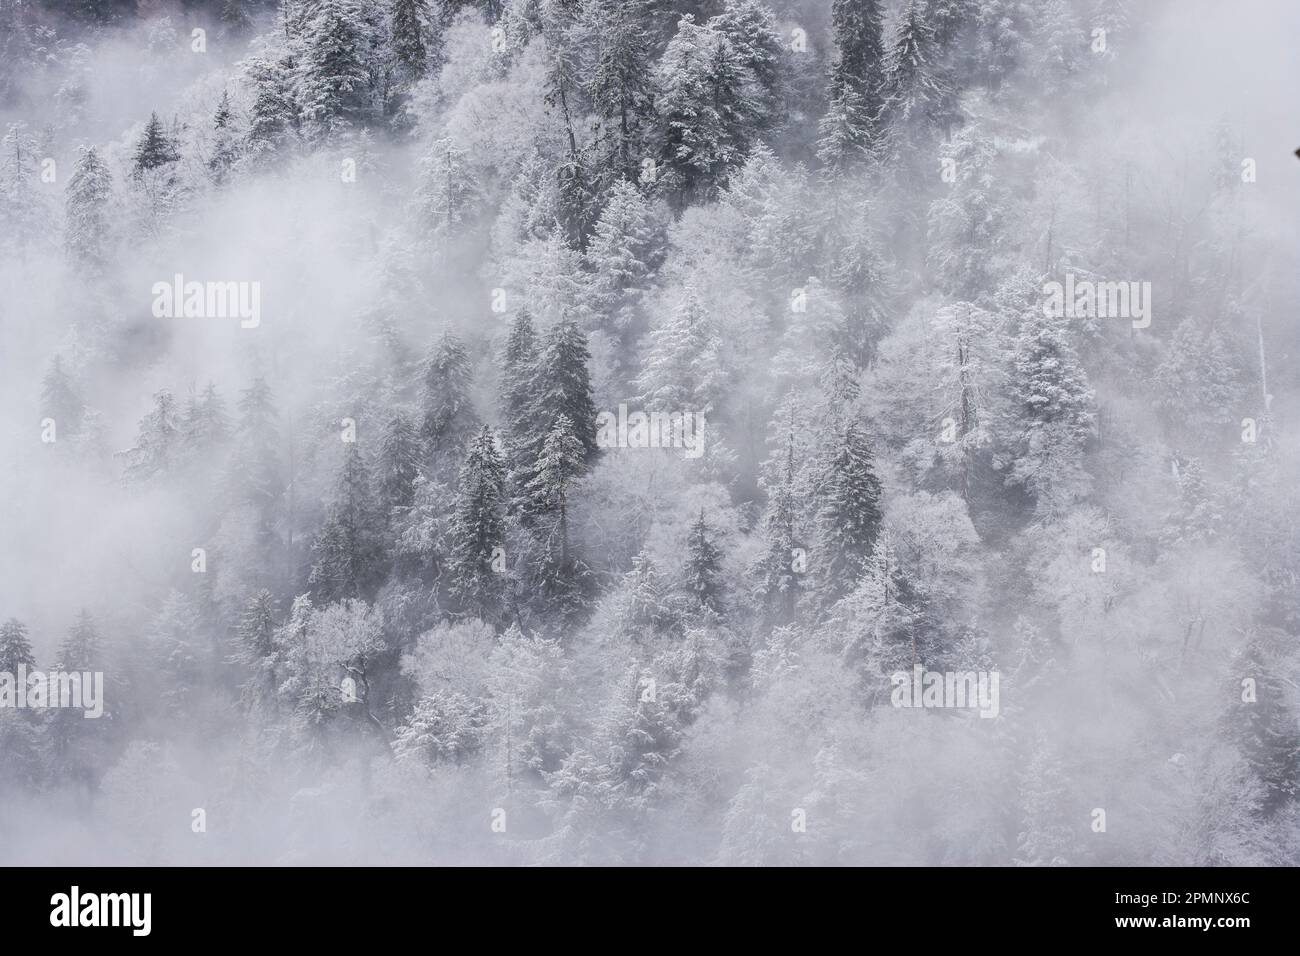 Winter storm blankets spruce and fir forest in late January near Newfound Gap, Great Smoky Mountain National Park, North Carolina, USA Stock Photo